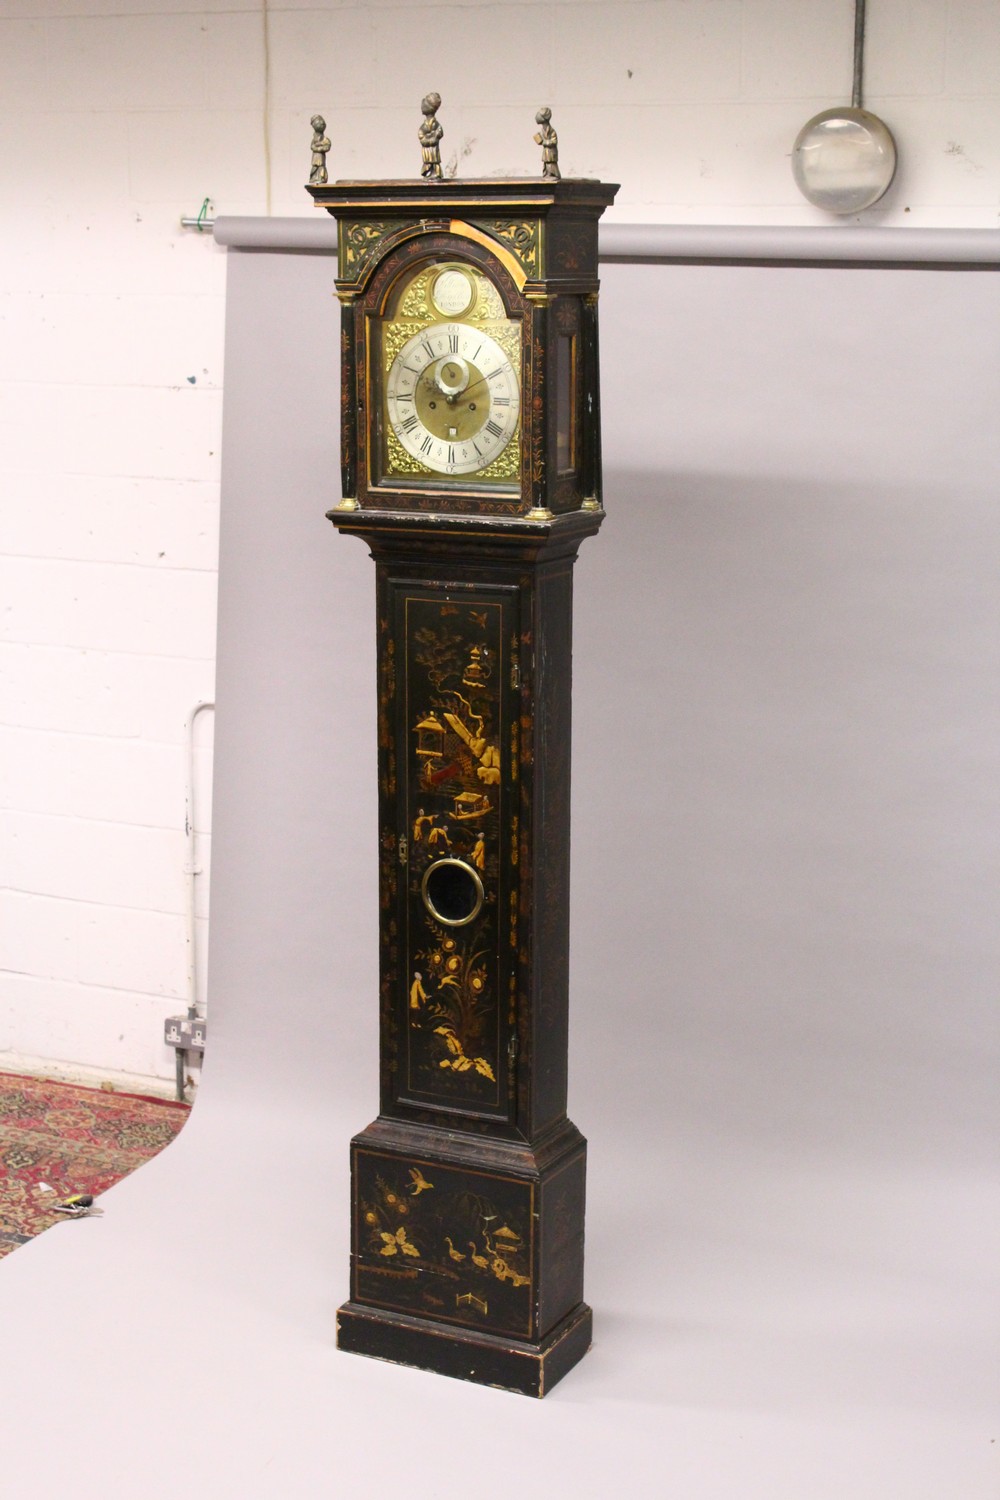 A GEORGE III CHINOISERIE DECORATED BLACK LACQUER LONGCASE CLOCK, by William Kipling, London, with - Image 2 of 26